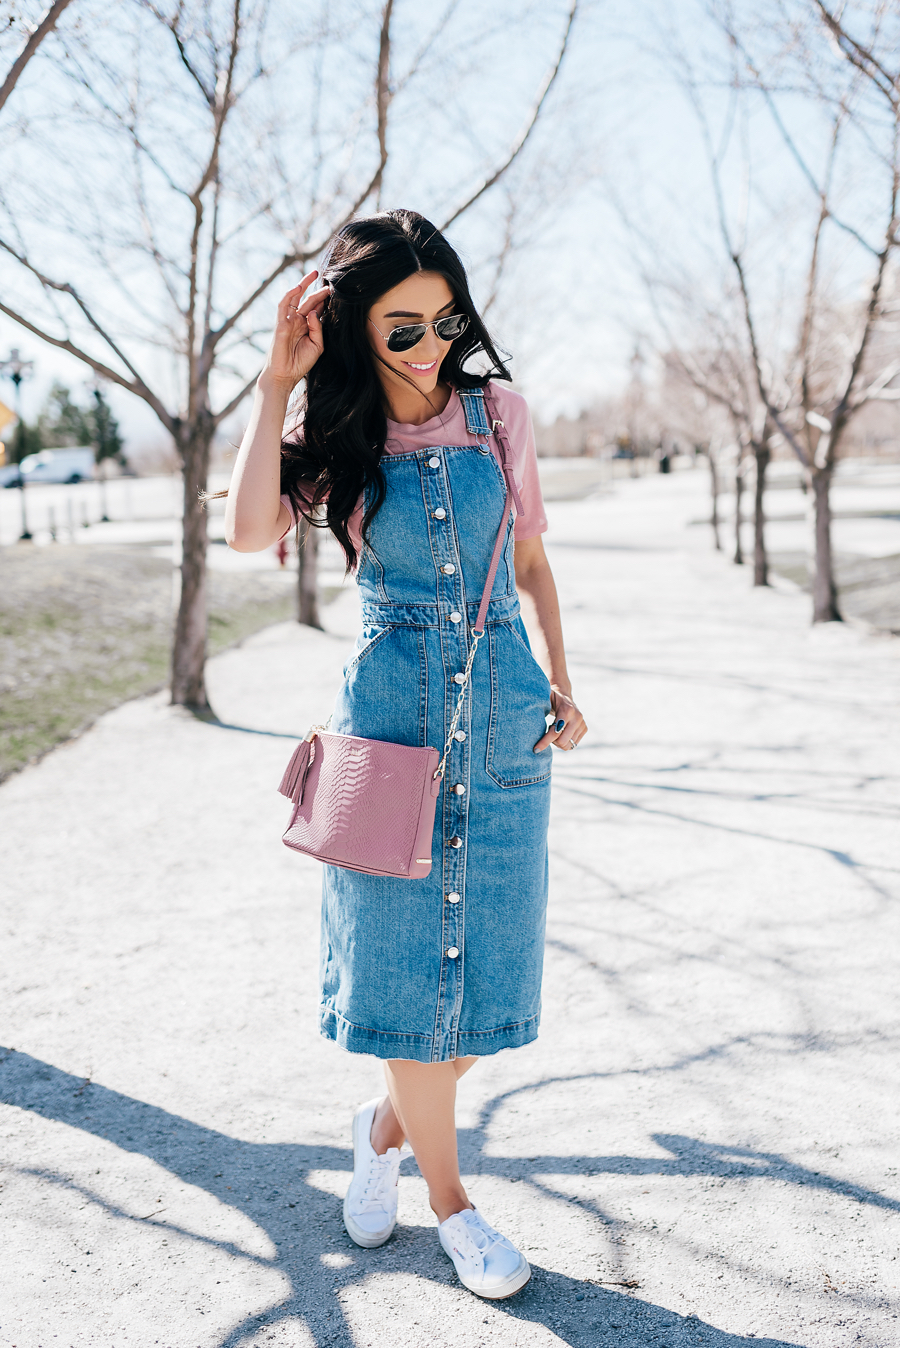 HOW TO STYLE A DENIM DRESS CASUALLY - 50 IS NOT OLD - A Fashion And Beauty  Blog For Women Over 50